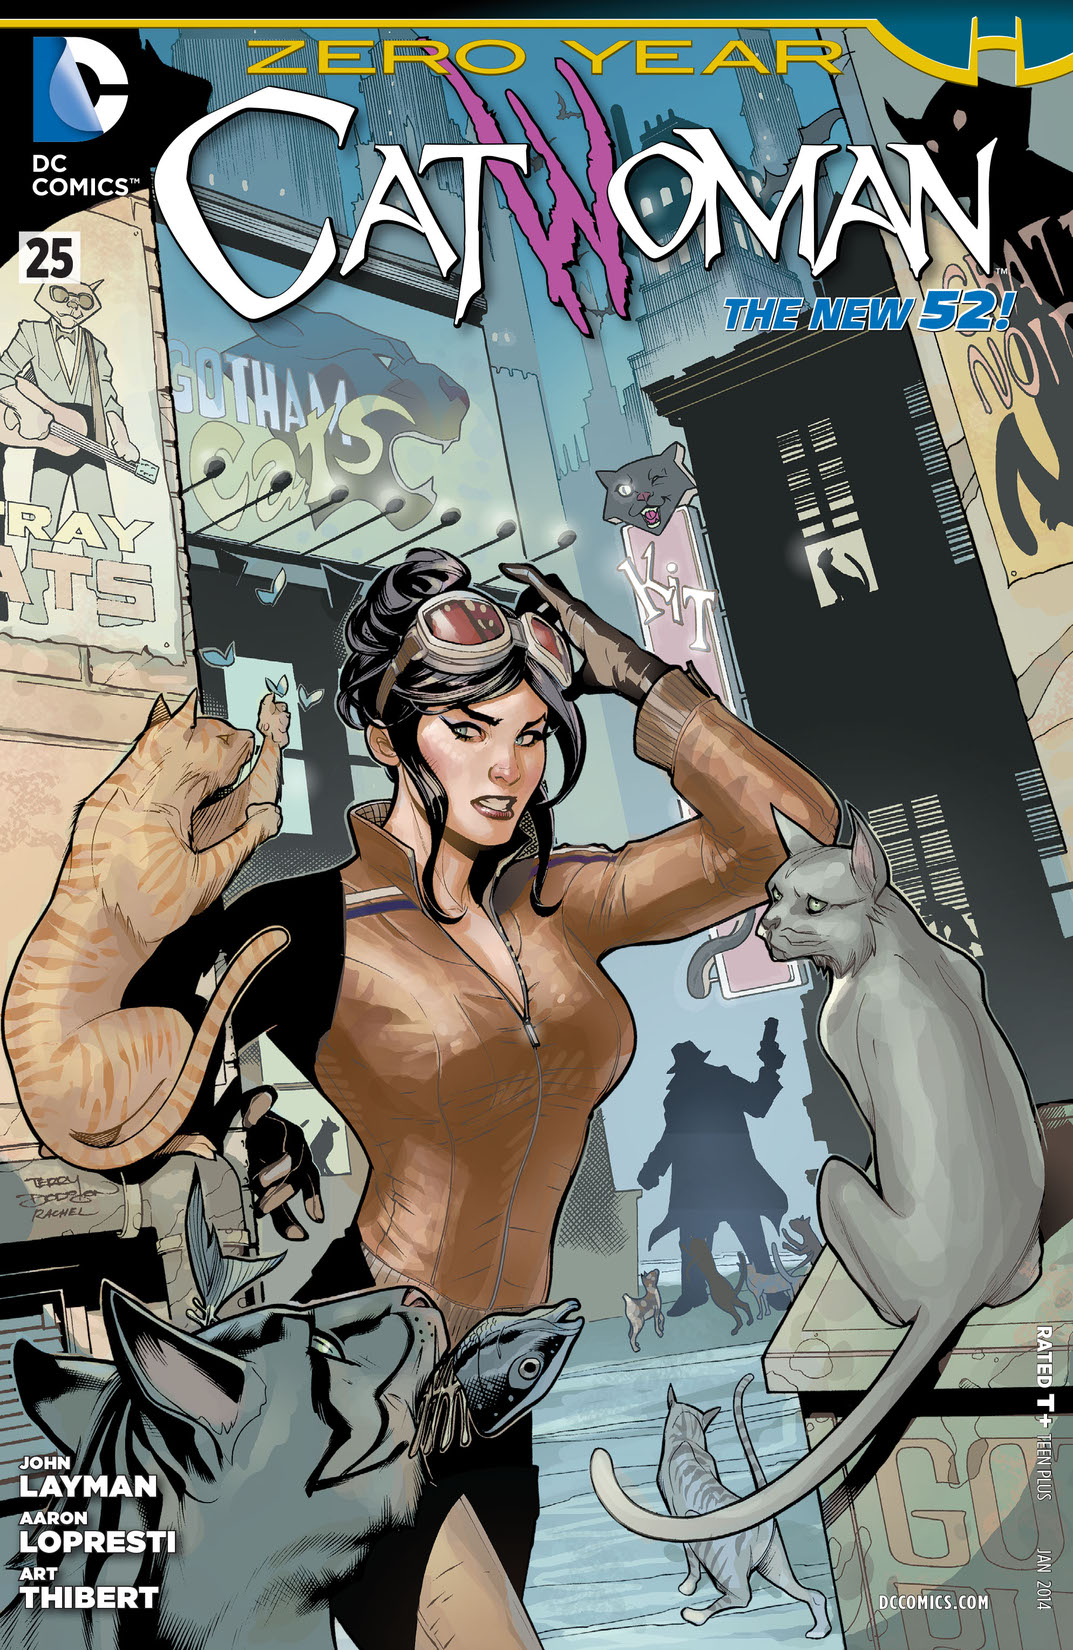 Catwoman (2011-) #25 preview images